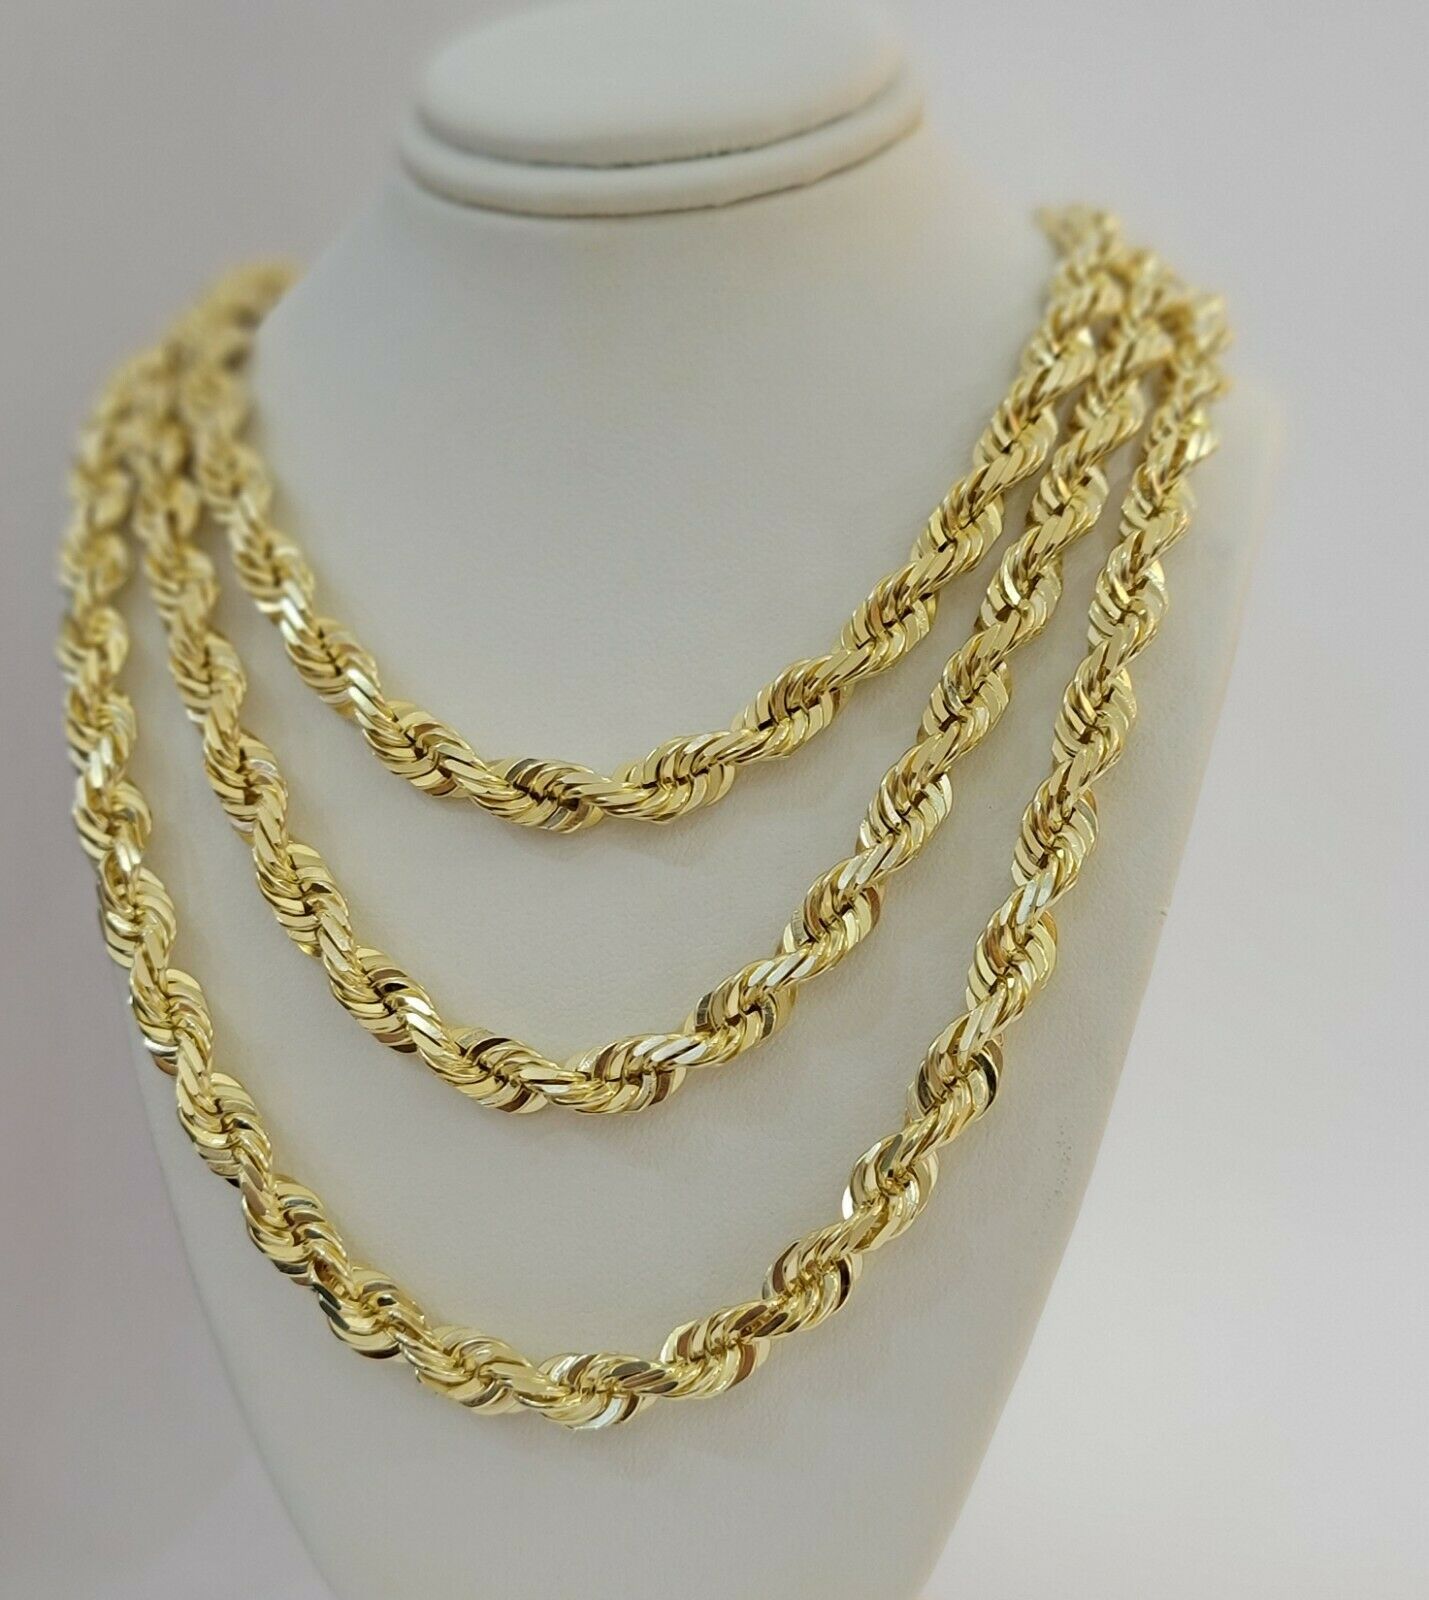 Real Solid 10K Rope Necklace 6mm Chain 18-30 inch 10kt Yellow Gold Diamond Cut 24 inch